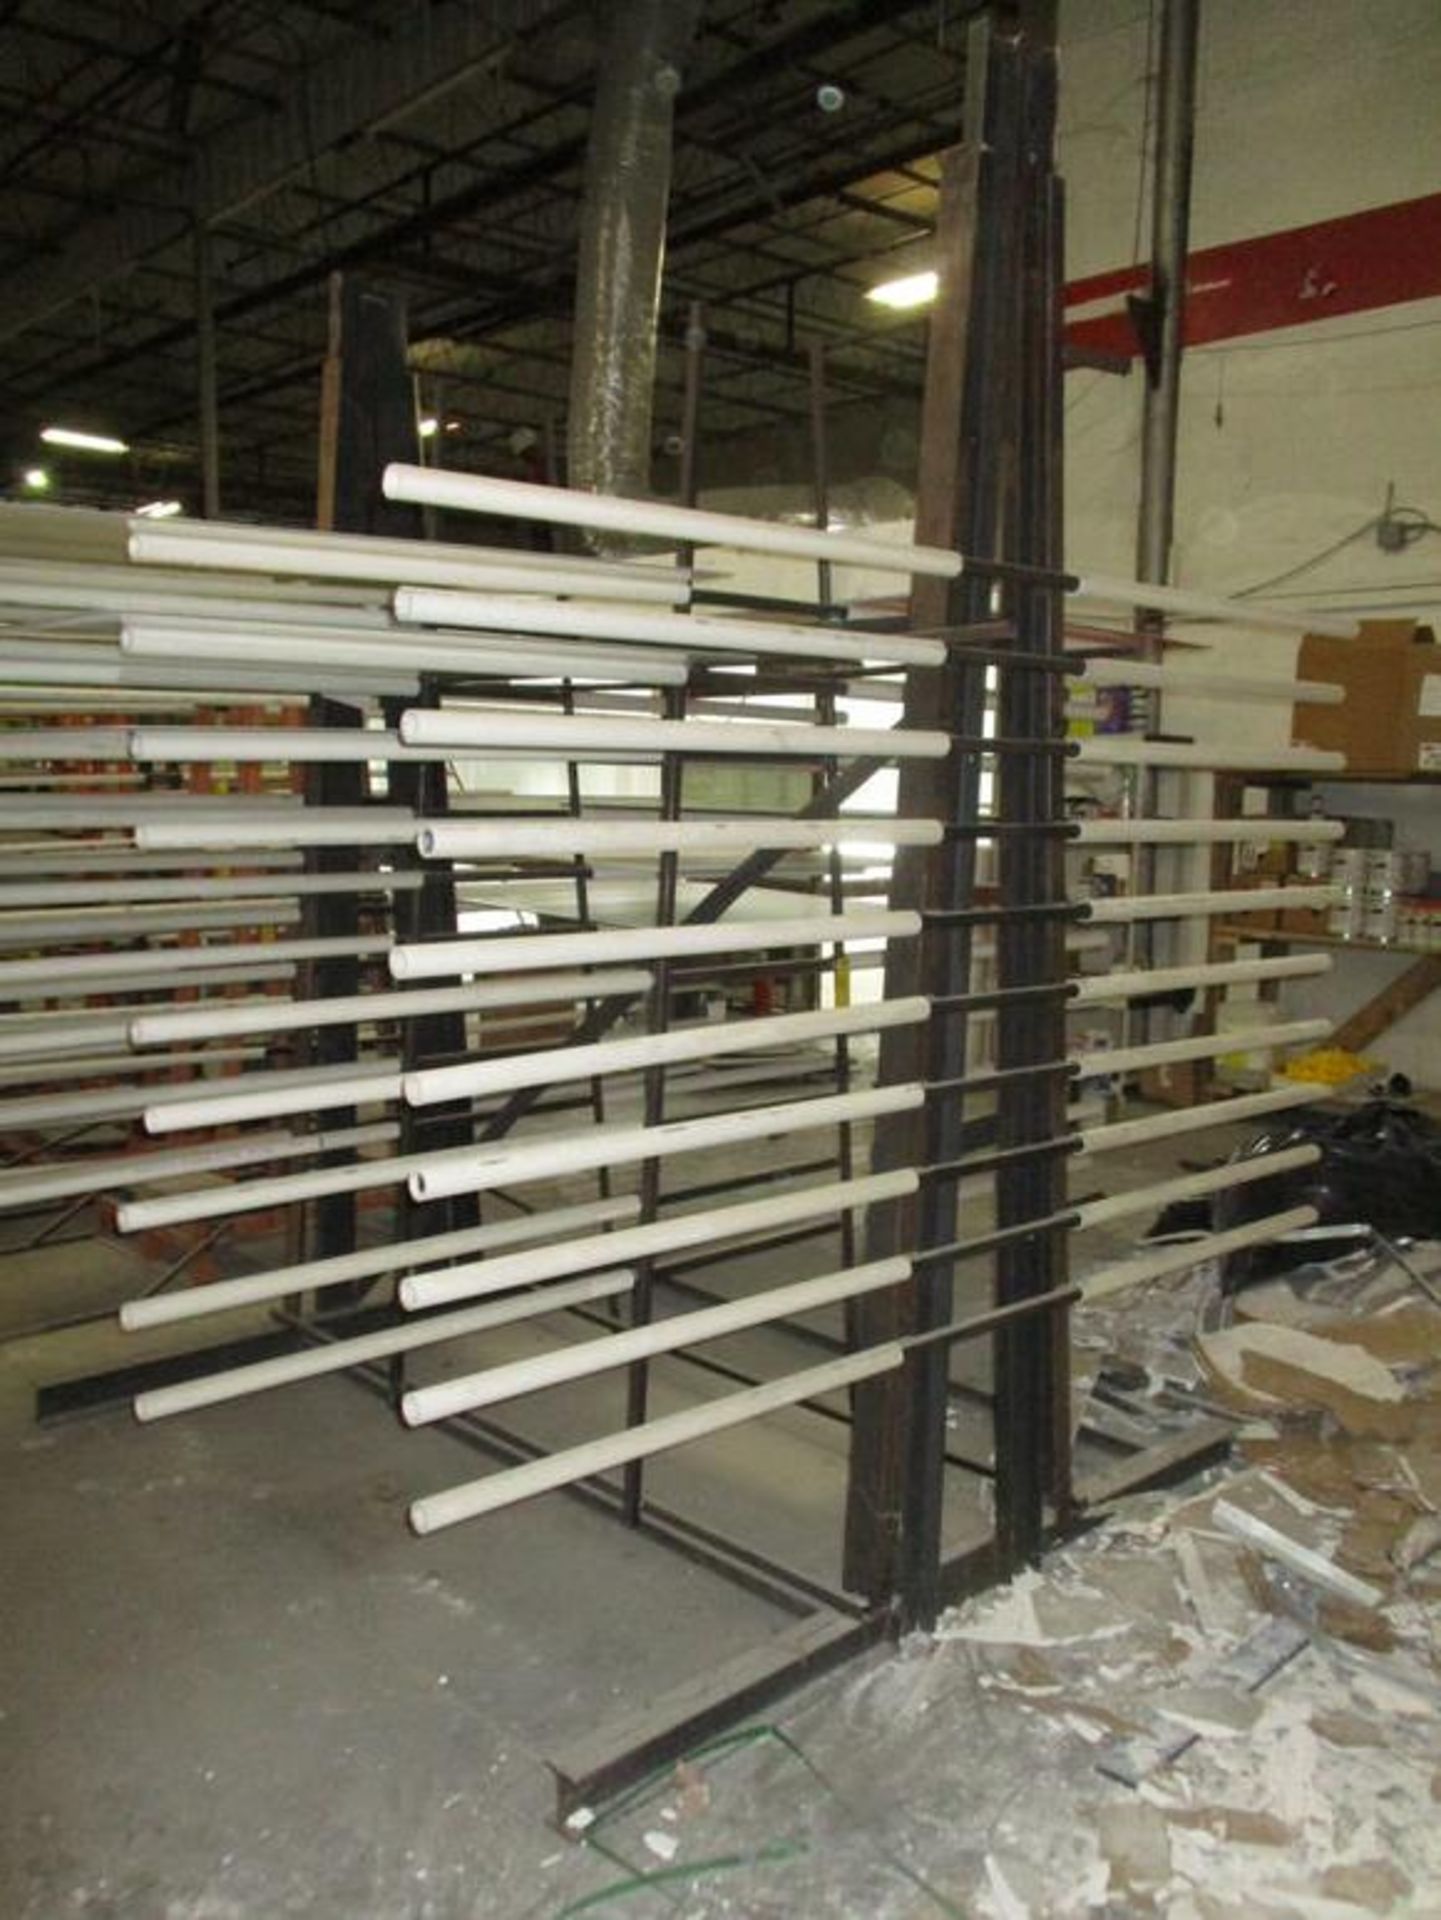 DOUBLE SIDED METAL GLASS RACK, APPROX 10' X 10' X 8' W/ HORIZONTAL HOLDER WELDED ON ONE SIDE - Image 2 of 2